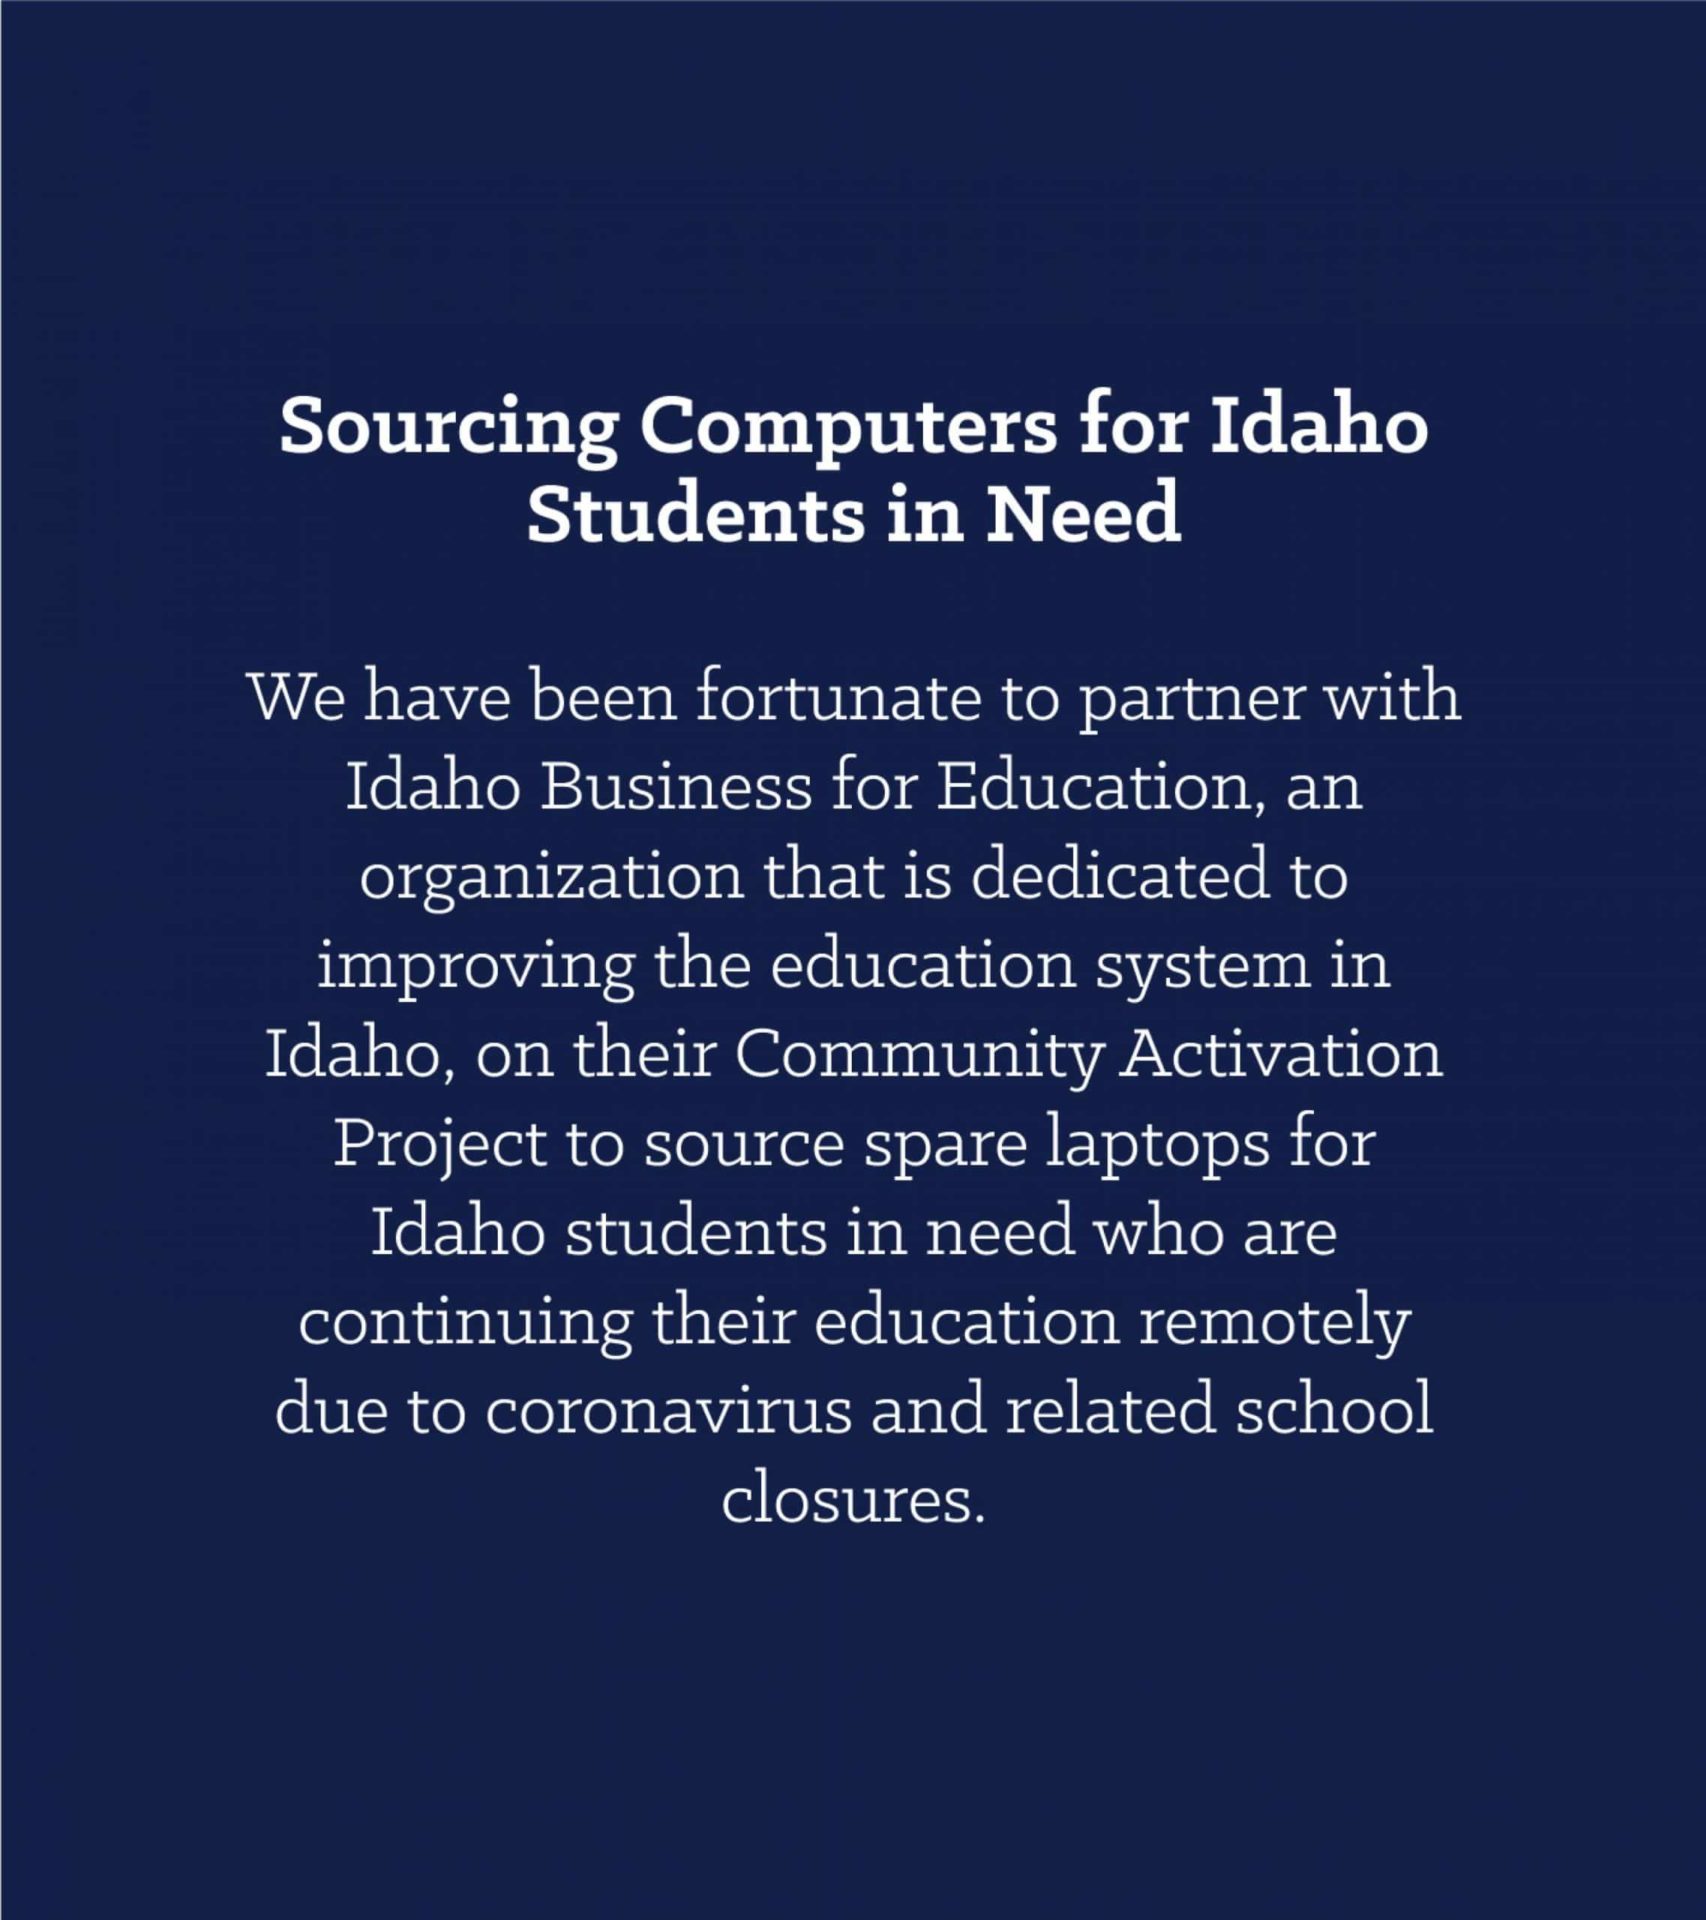 Sourcing Computers for Idaho Students in Need